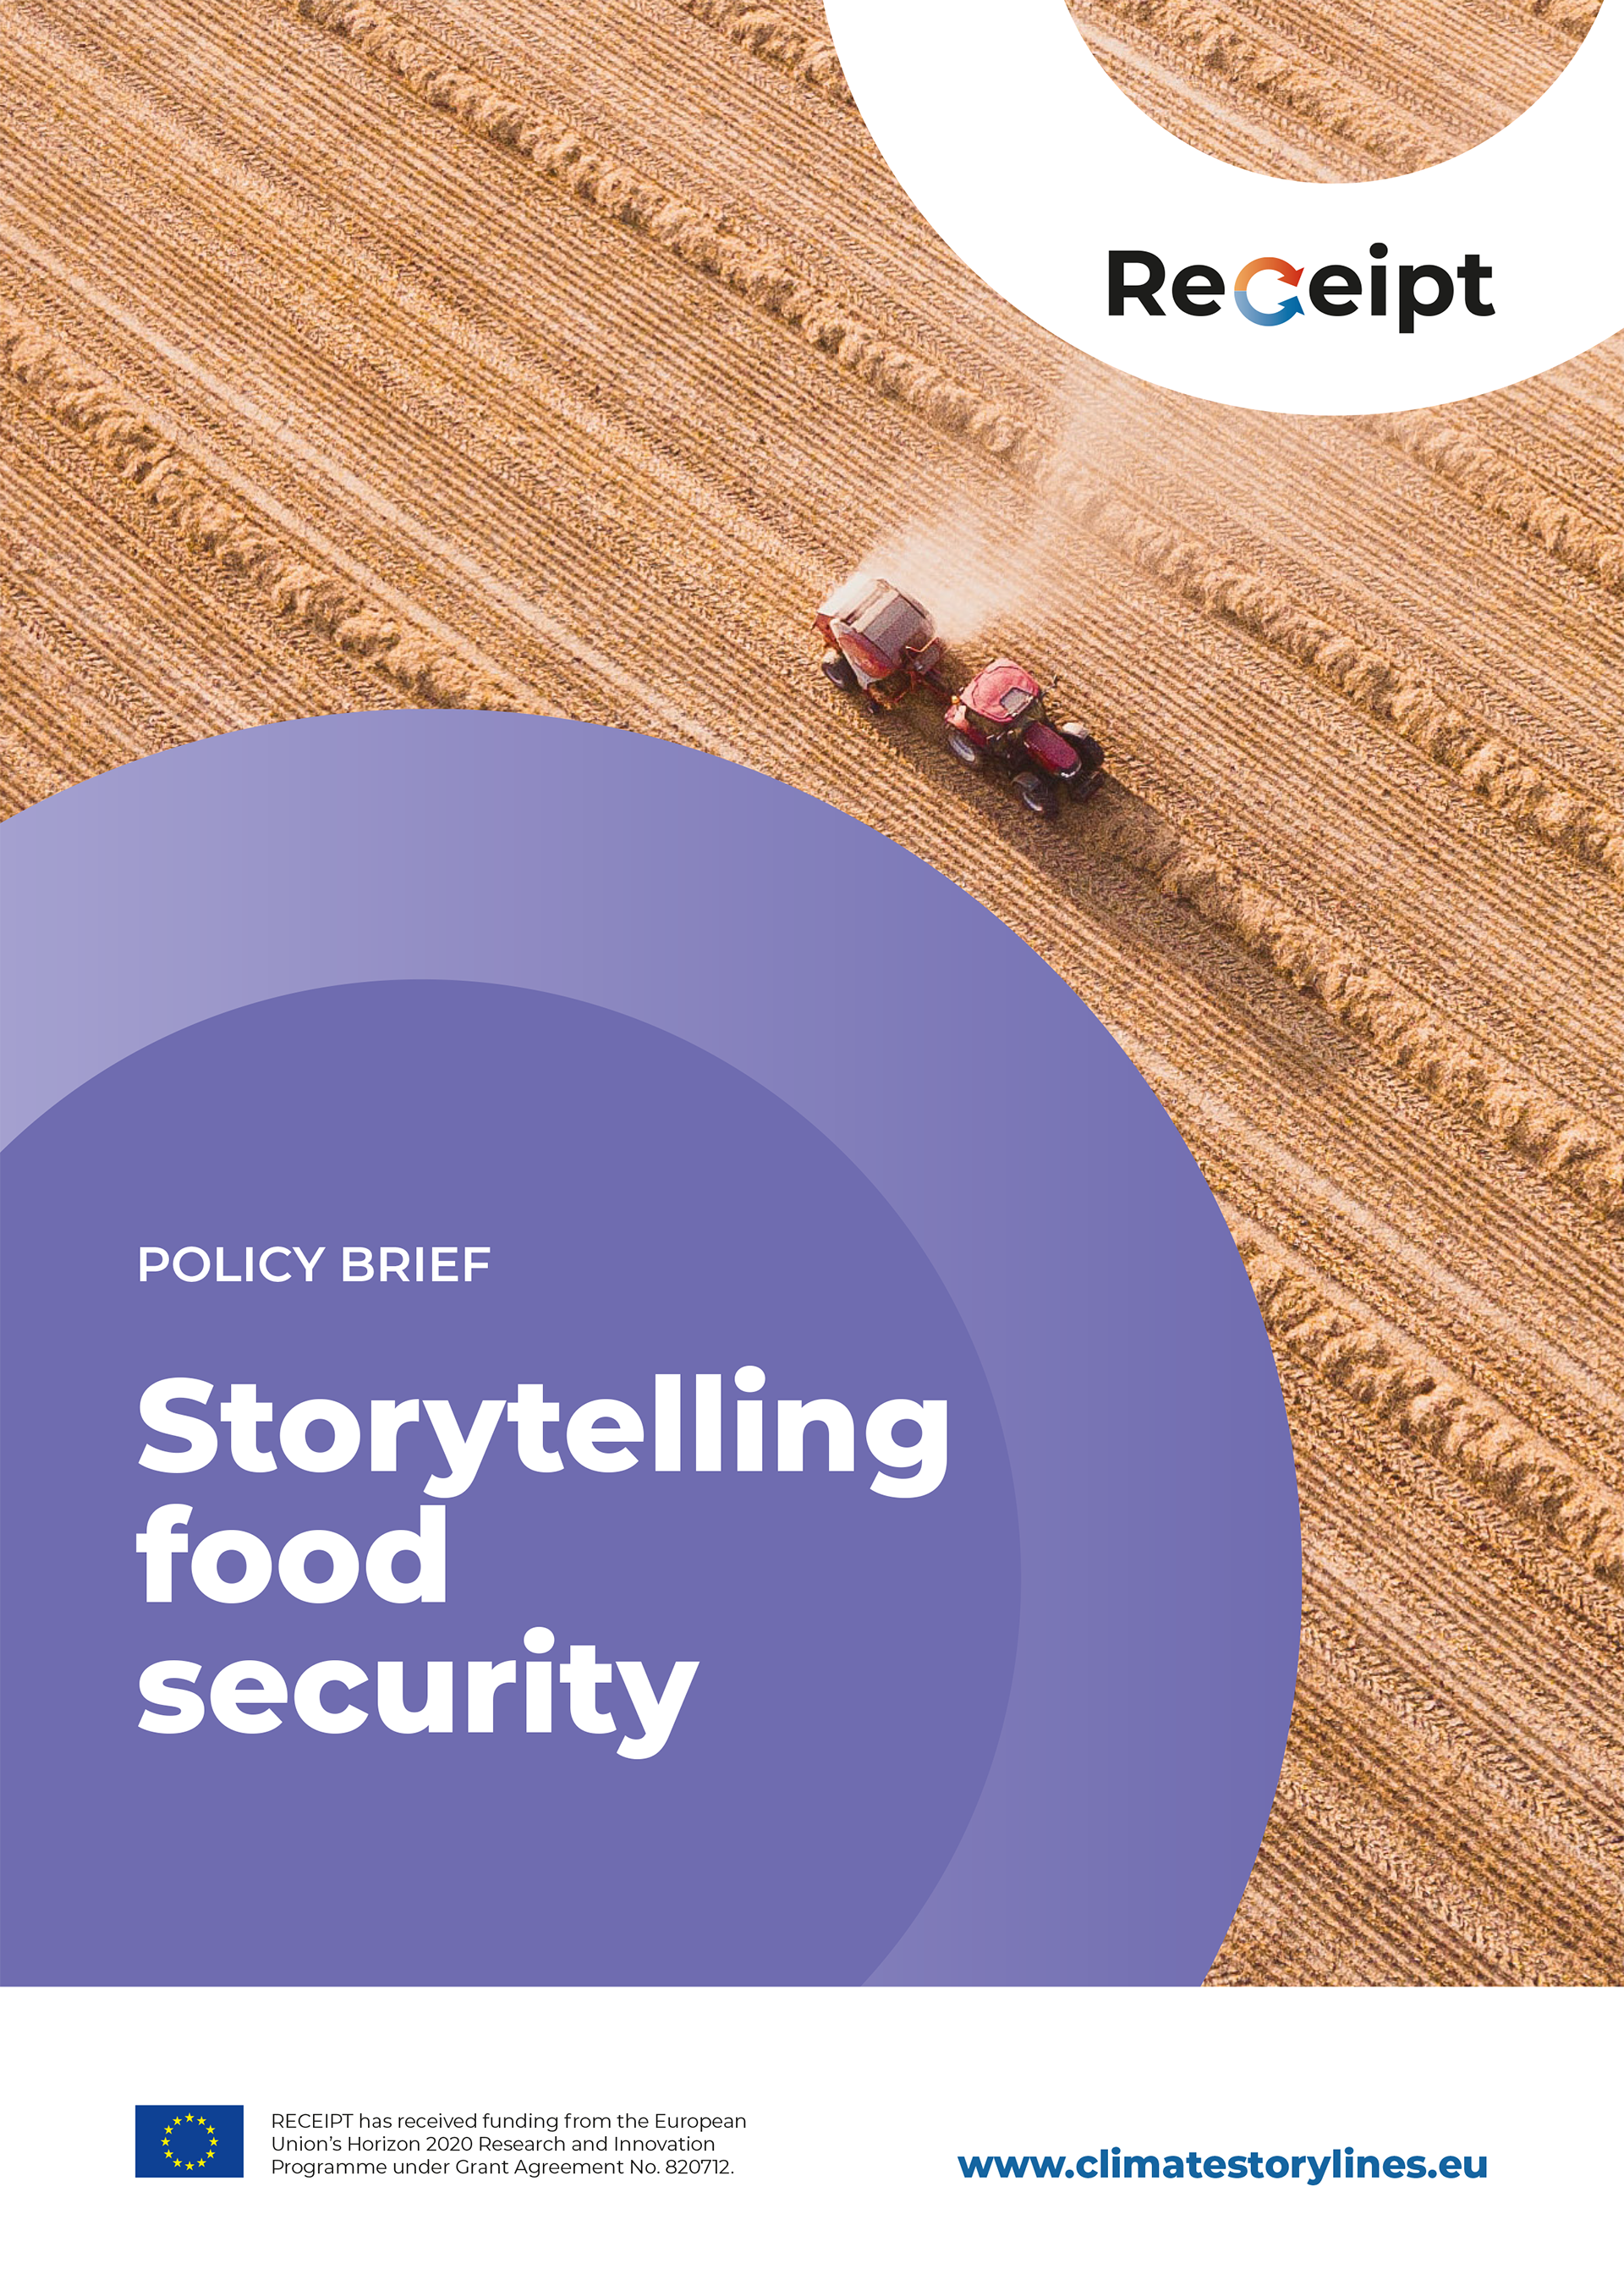 POLICY BRIEF Storytelling food security